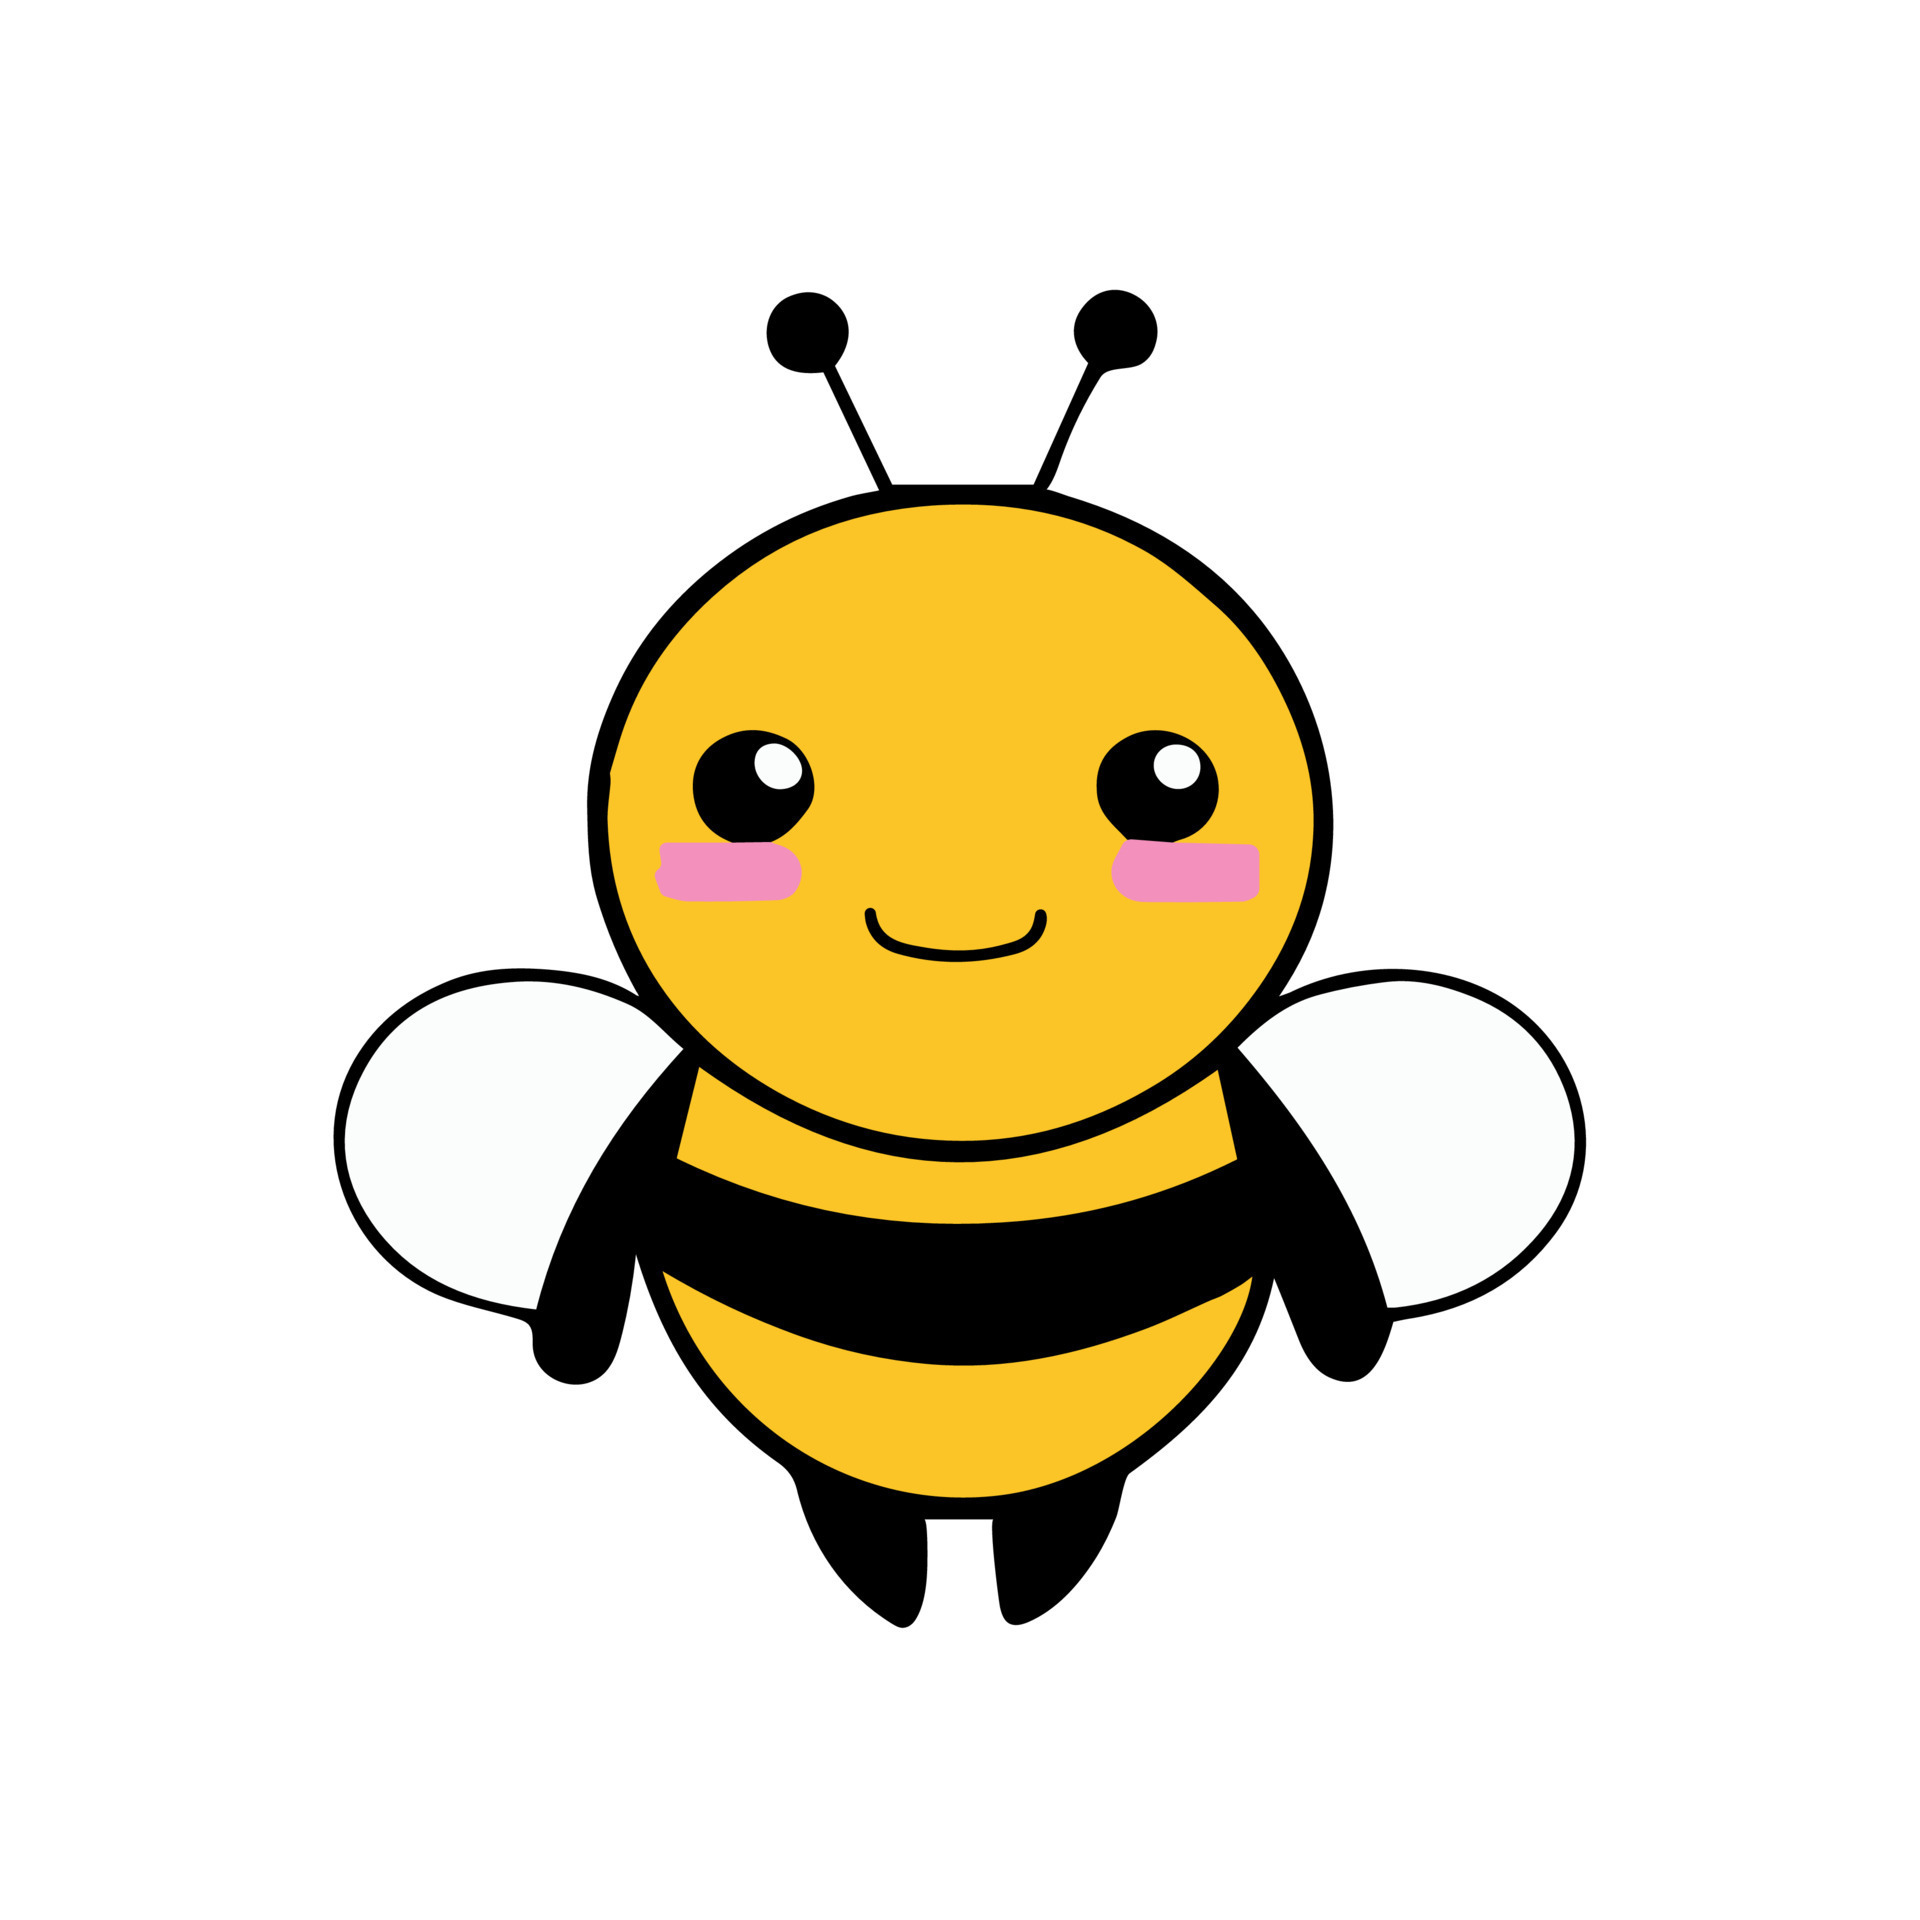 25 Cute Bee Drawing Ideas - How to Draw a Bee - Blitsy